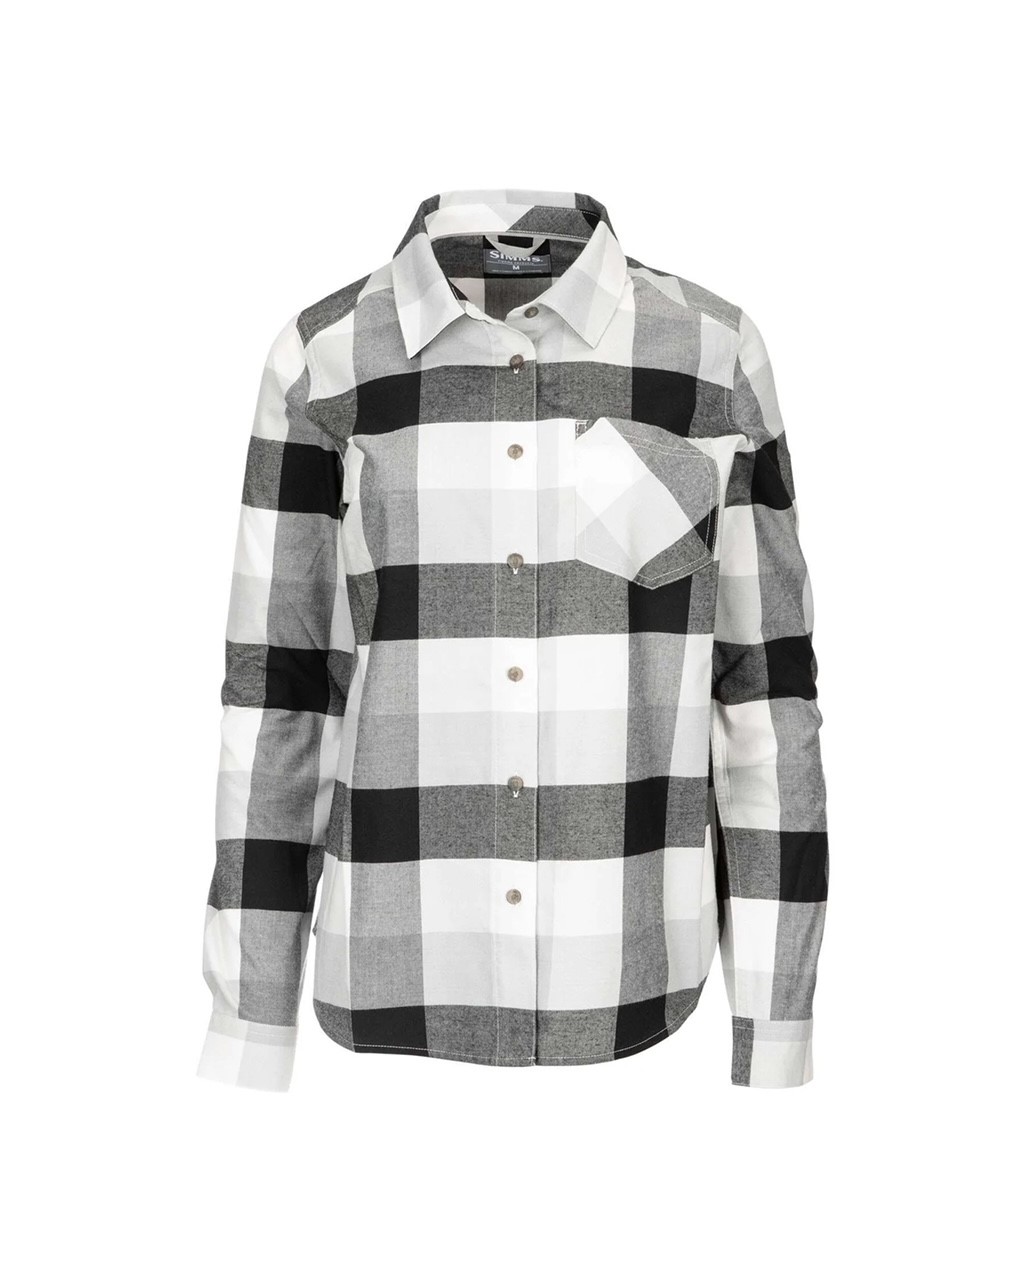 Simms W's Sunset Flannel - Grey Heather Buffalo Plaid - Extra Large